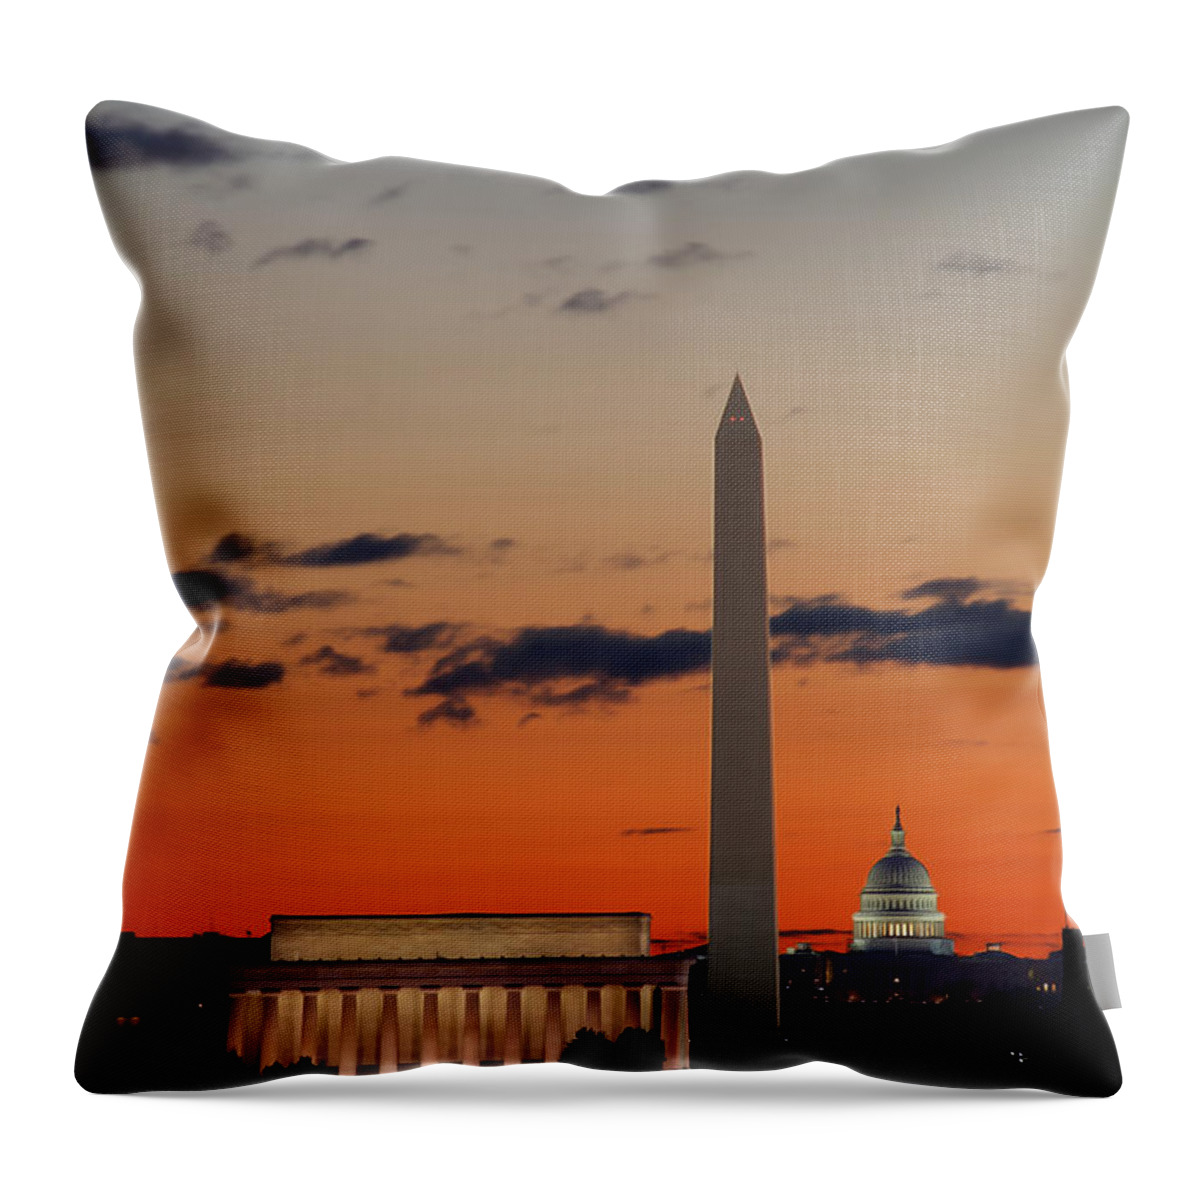 Metro Throw Pillow featuring the digital art Digital Liquid - Monuments at Sunrise by Metro DC Photography